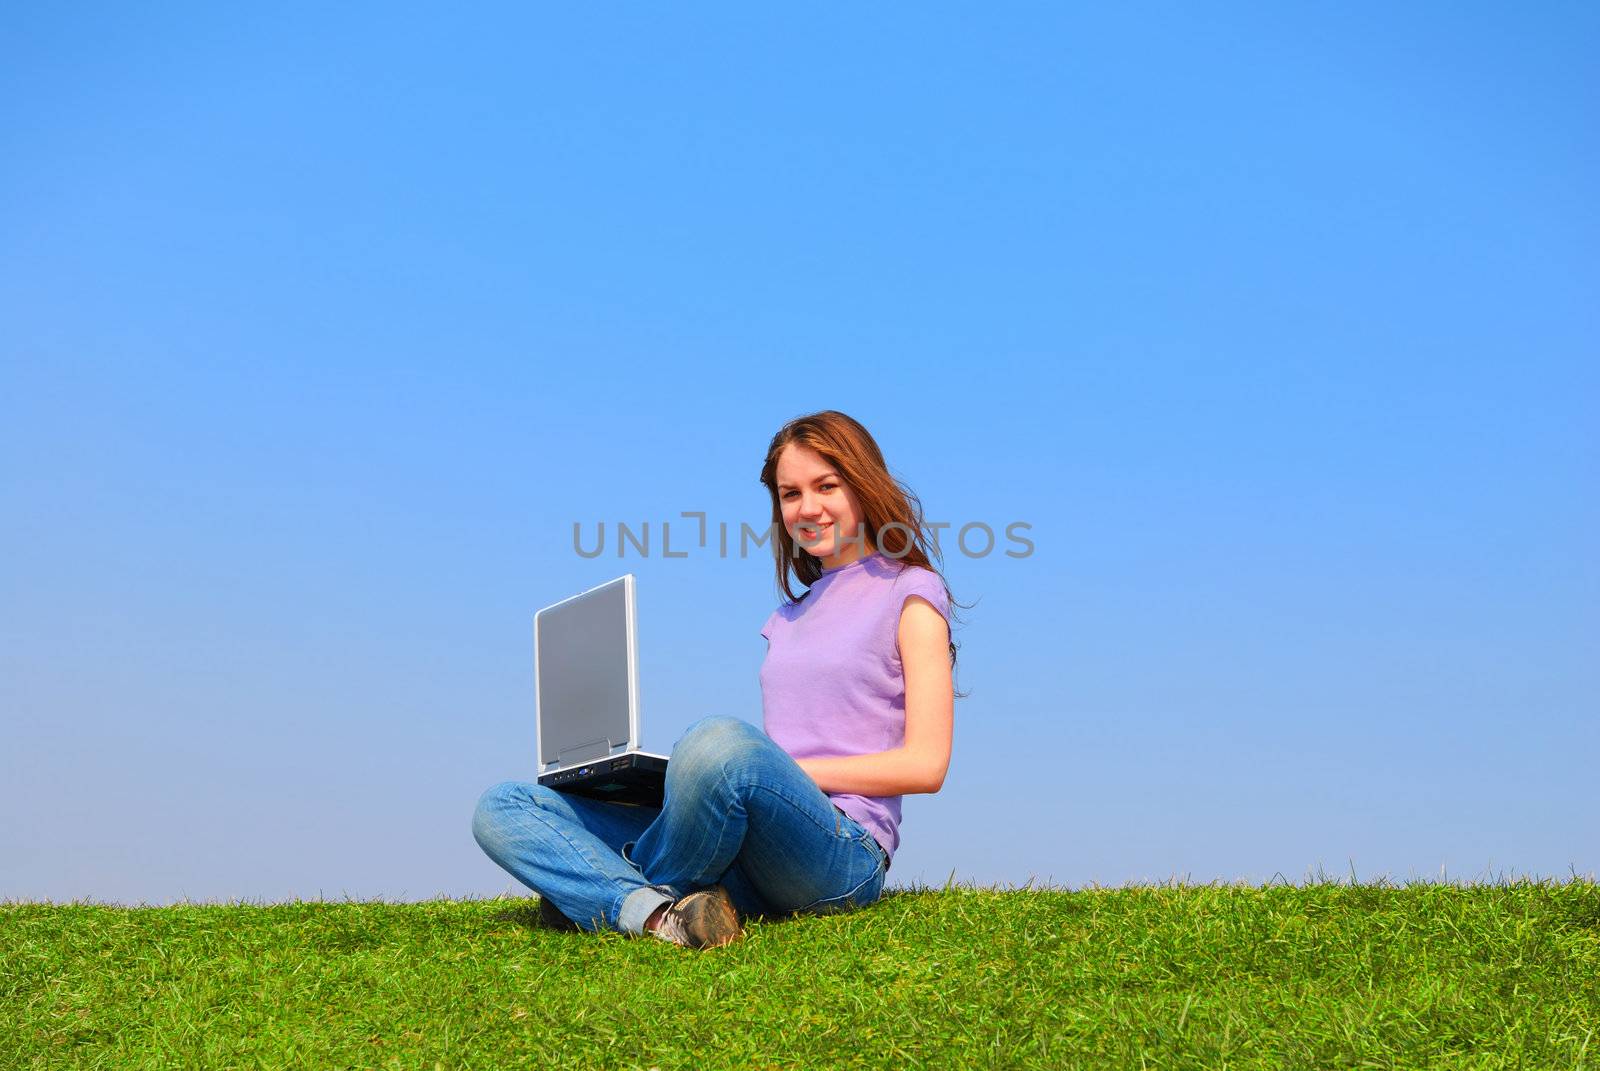 Girl with notebook sitting on grass against sky                                      